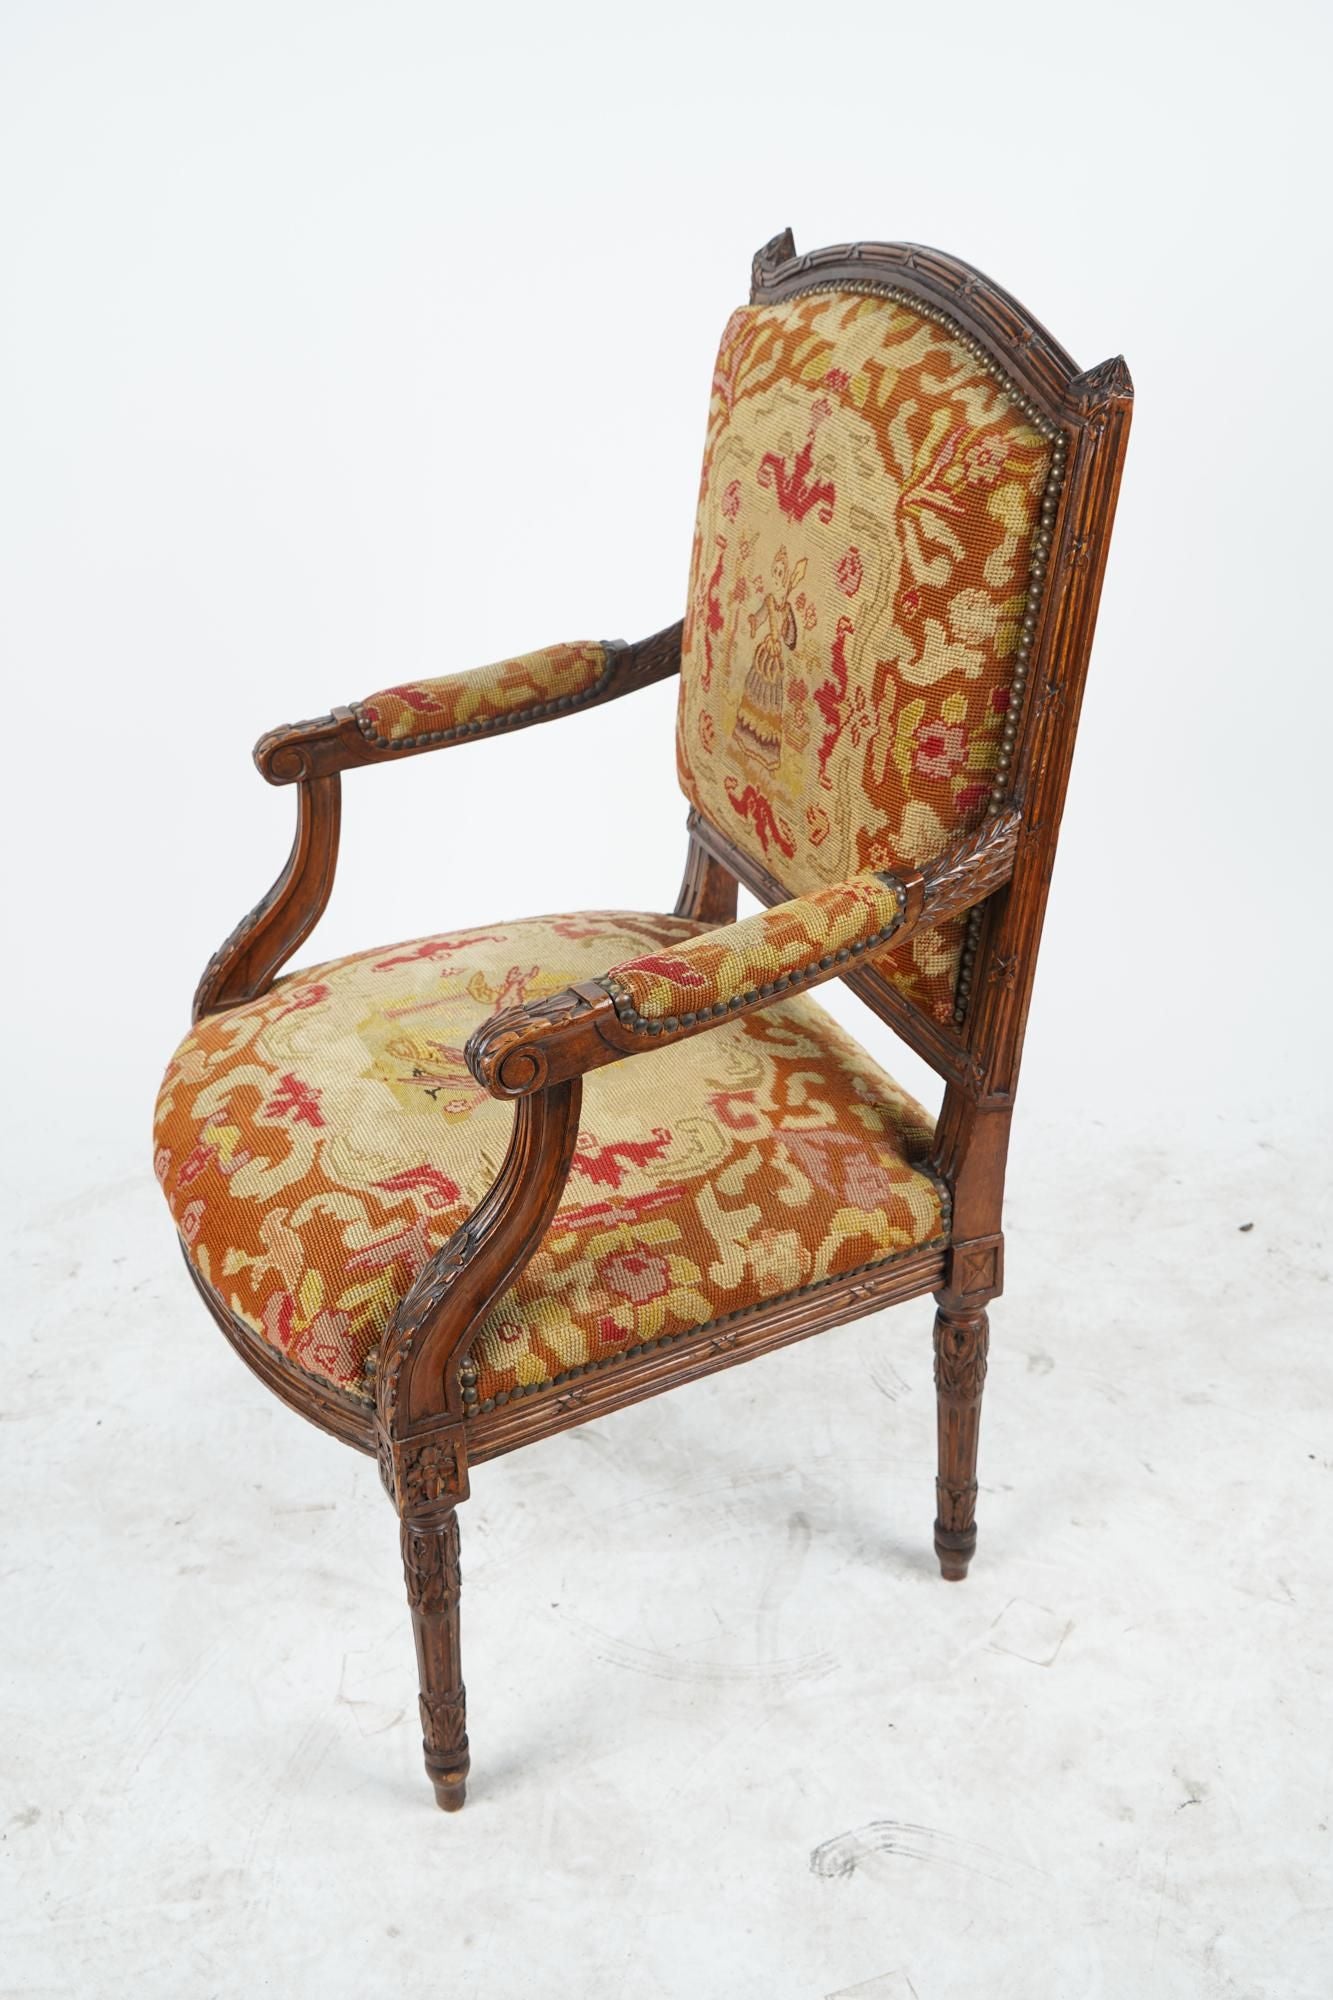 AF2-012: ANTIQUE LATE 19TH CENTURY FRENCH LOUIS XVI STYLE CARVED WALNUT FAUTEUIL